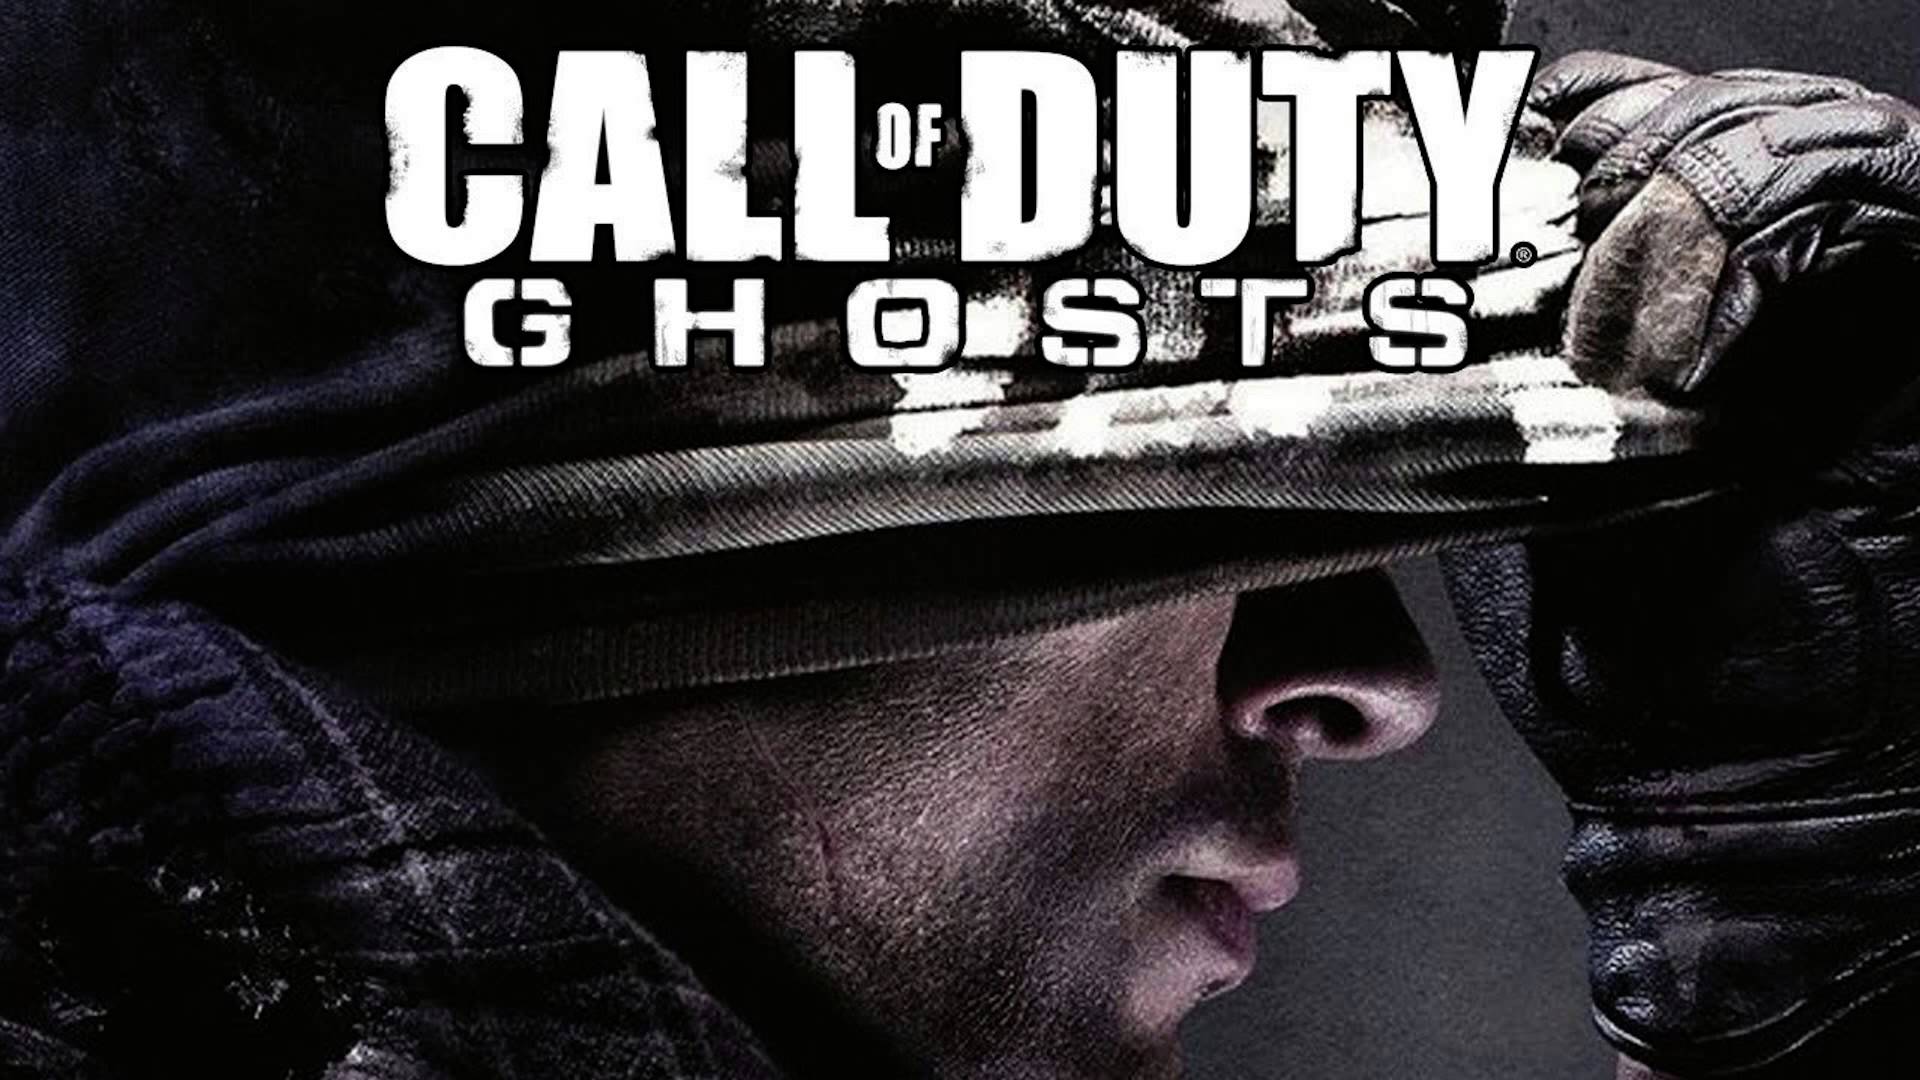 Download Call of Duty Ghost Wallpaper Free Wallpapers